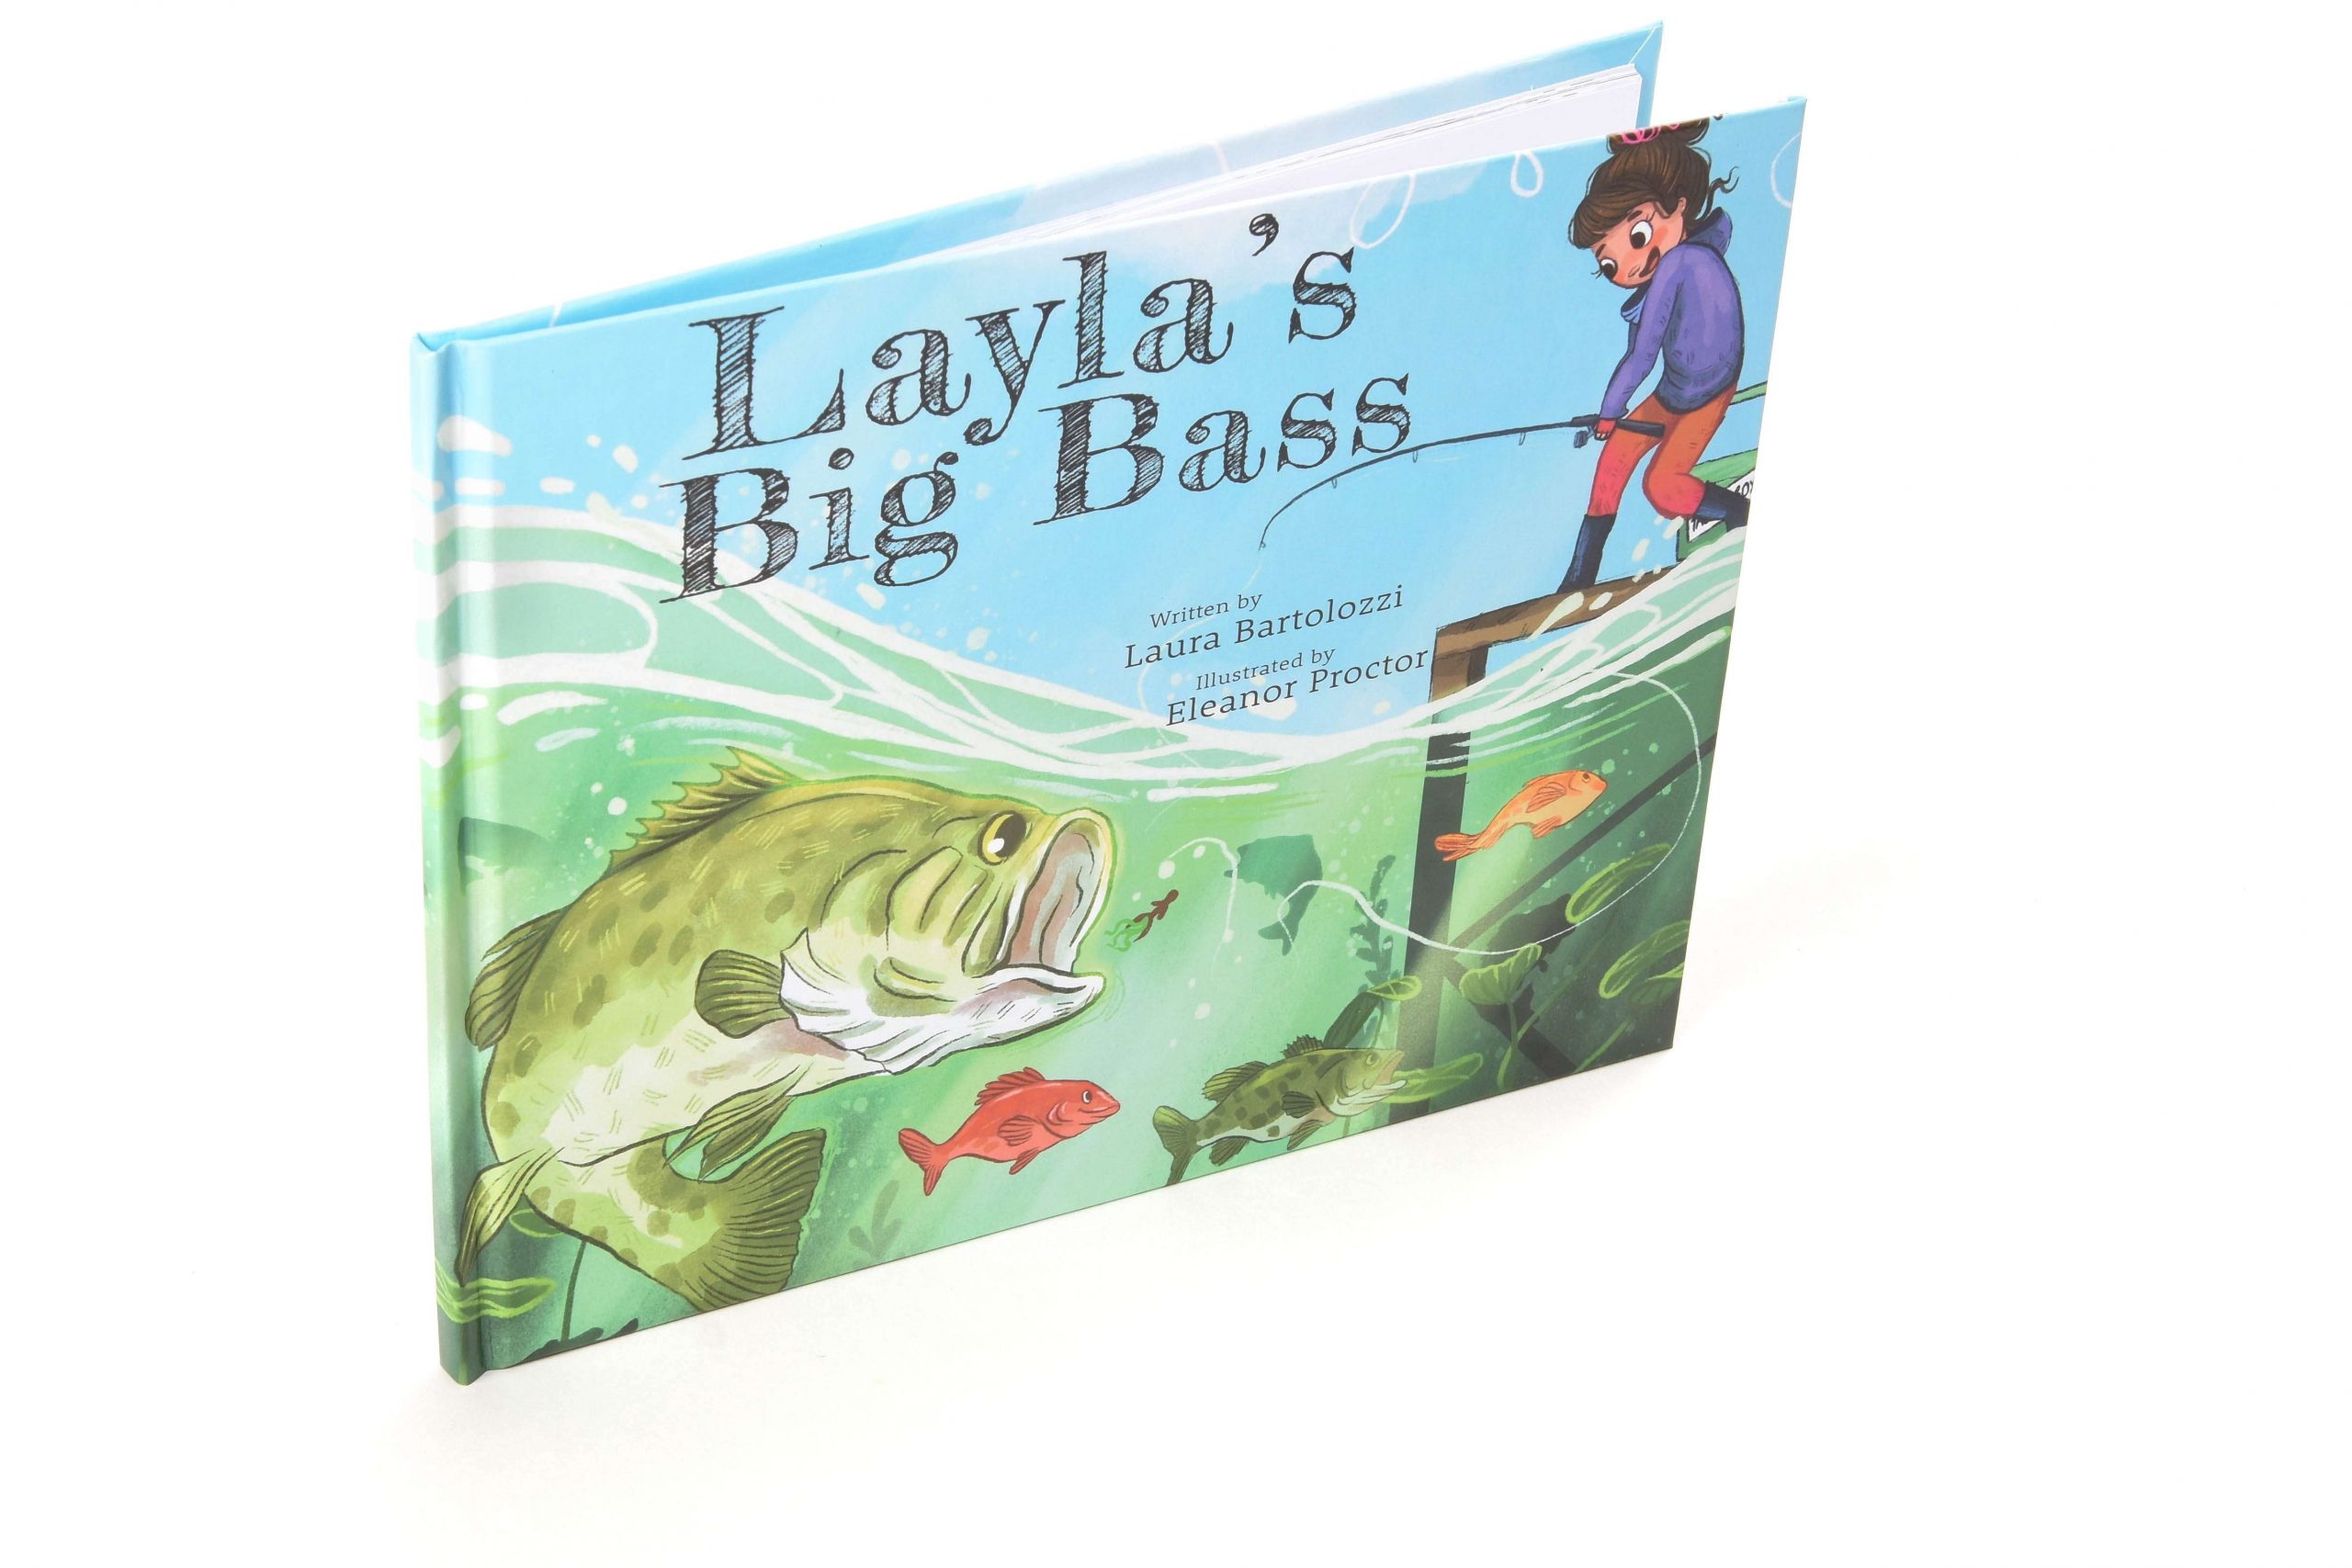 B.A.S.S. sponsors new children's book to inspire girls to fish